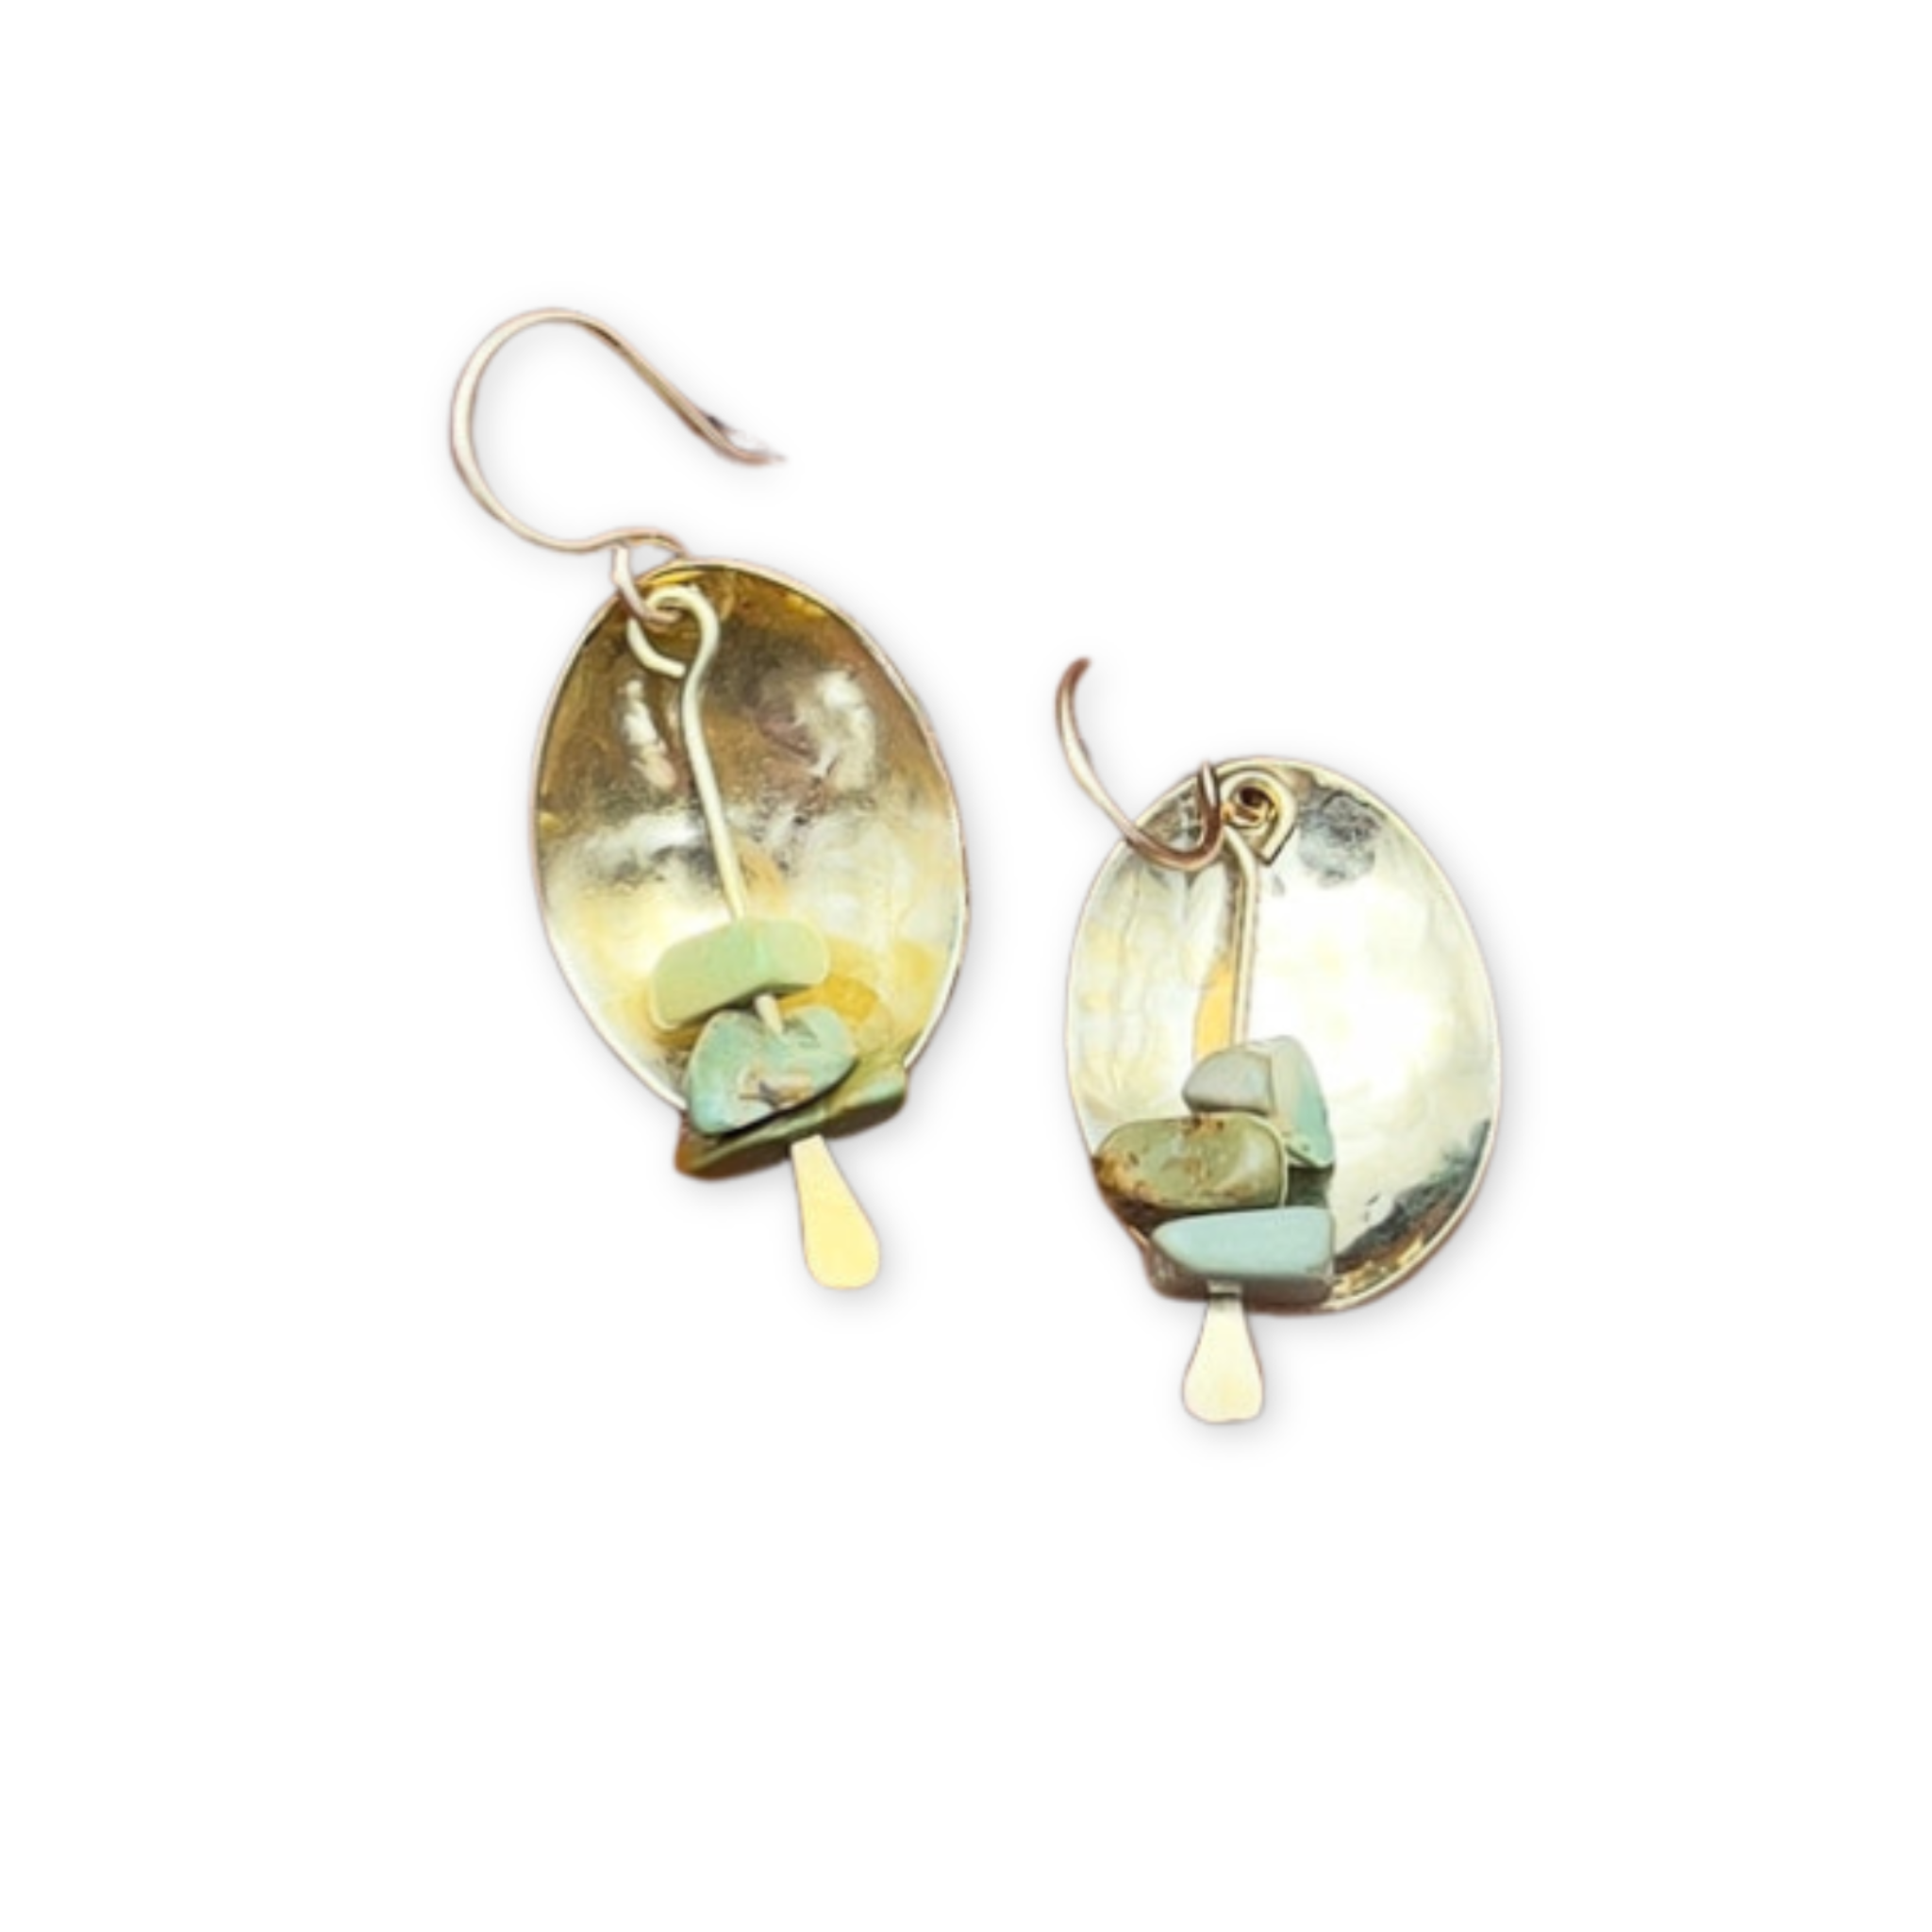 earrings with hammered ovals and jasper stones